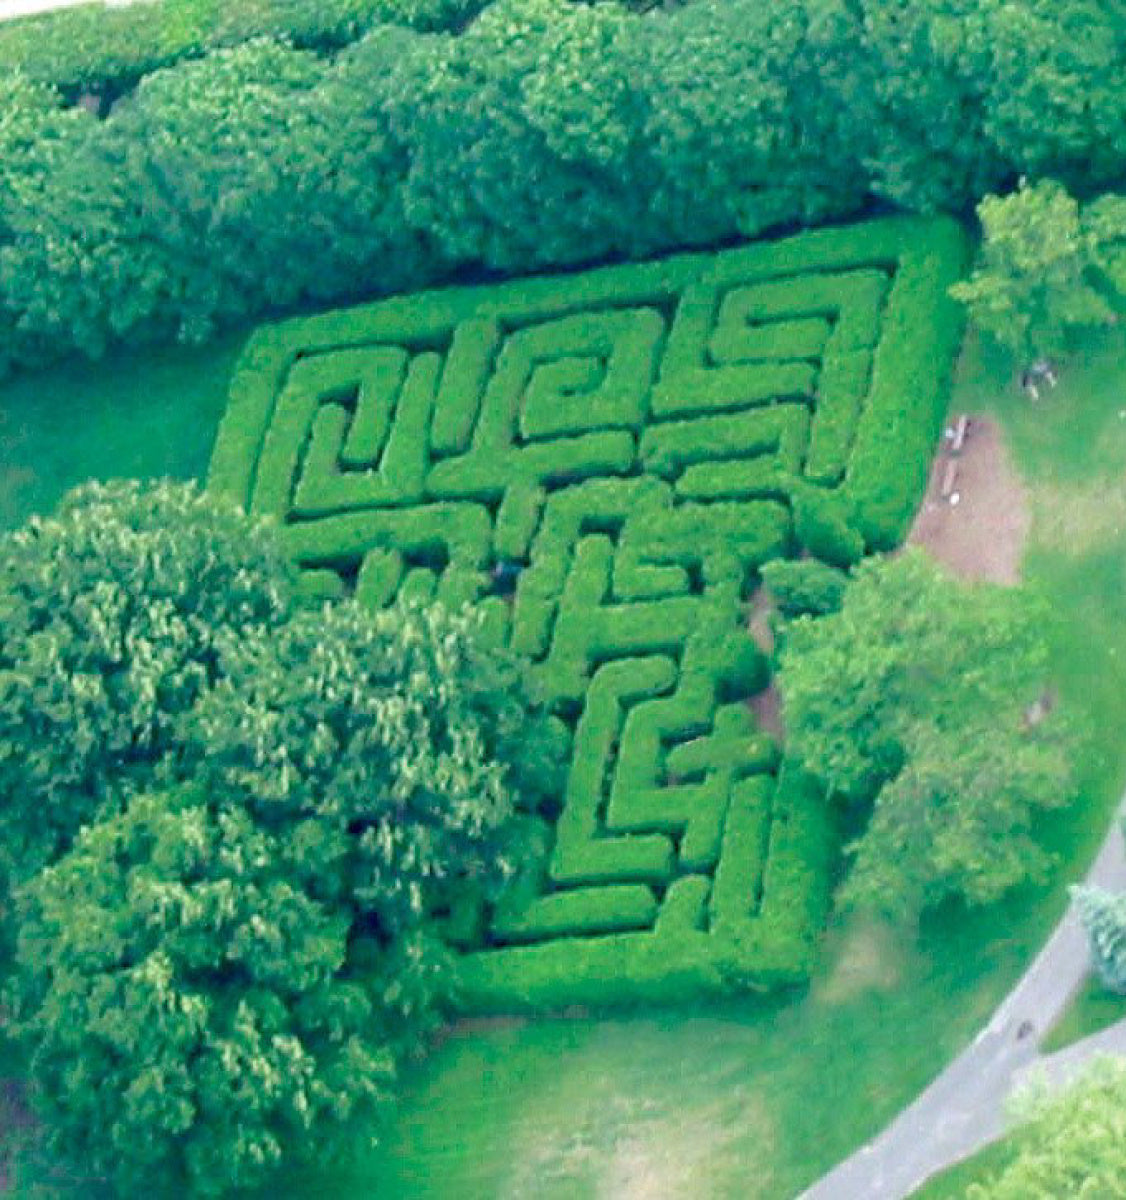 CENTRE ISLAND MAZE PHOTO CREDIT: WWW.THESTAR.COM THIS WAS ONE OF MY FAVOURITE PLACES TO GO BECAUSE I LOVED TRYING TO FIND MY WAY OUT OF THIS MAZE. IF YOU WANT TO READ MORE ABOUT IT CLICK HERE.